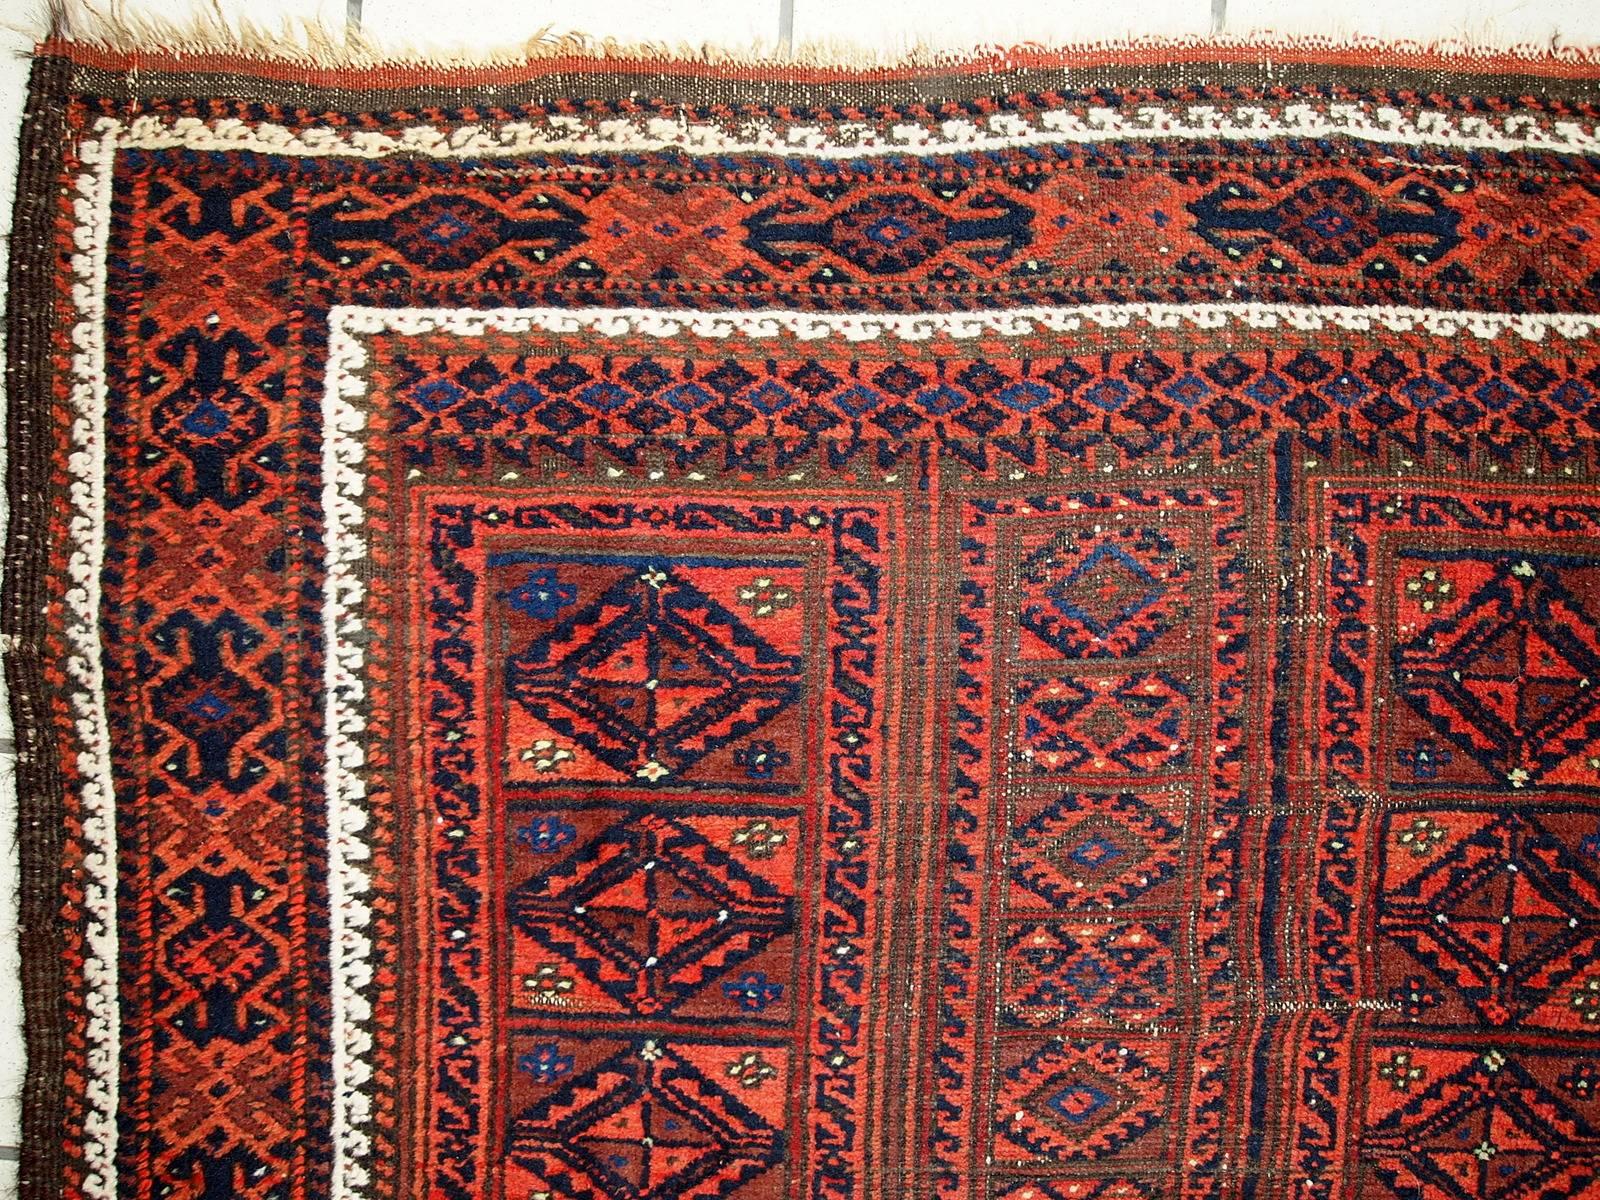 Antique handmade Afghan Baluch rug. This Afghan rug was made in combination of red, burgundy, white and blue colors. Beautiful tribal design with geometric accent. The condition is fair for the age, has some age wear.